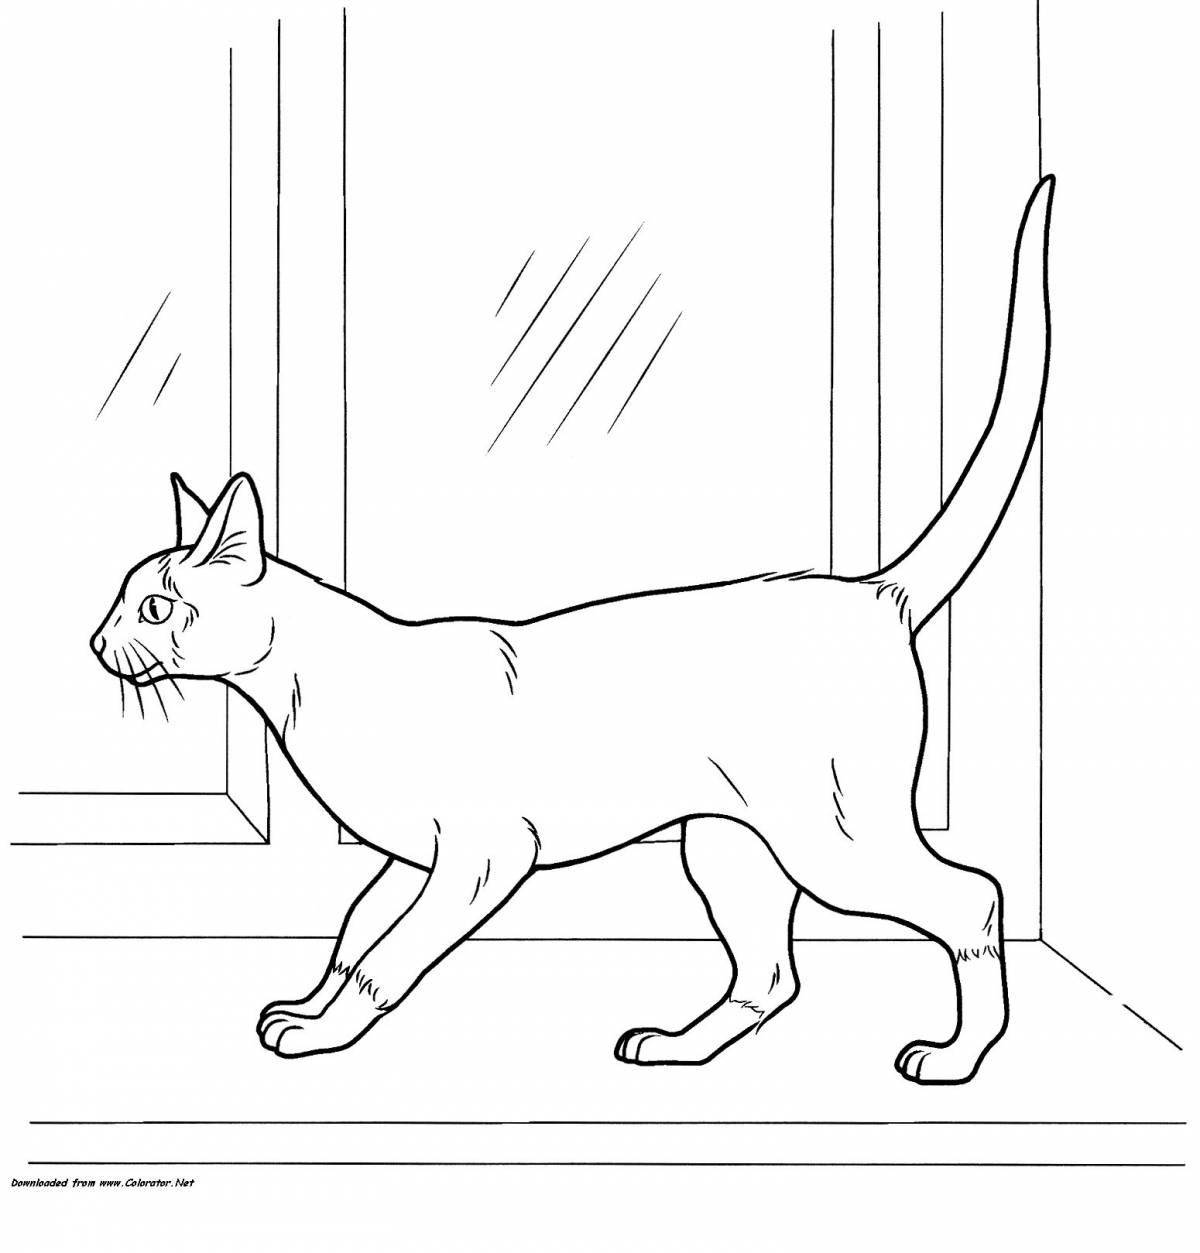 Exotic siamese cat coloring page